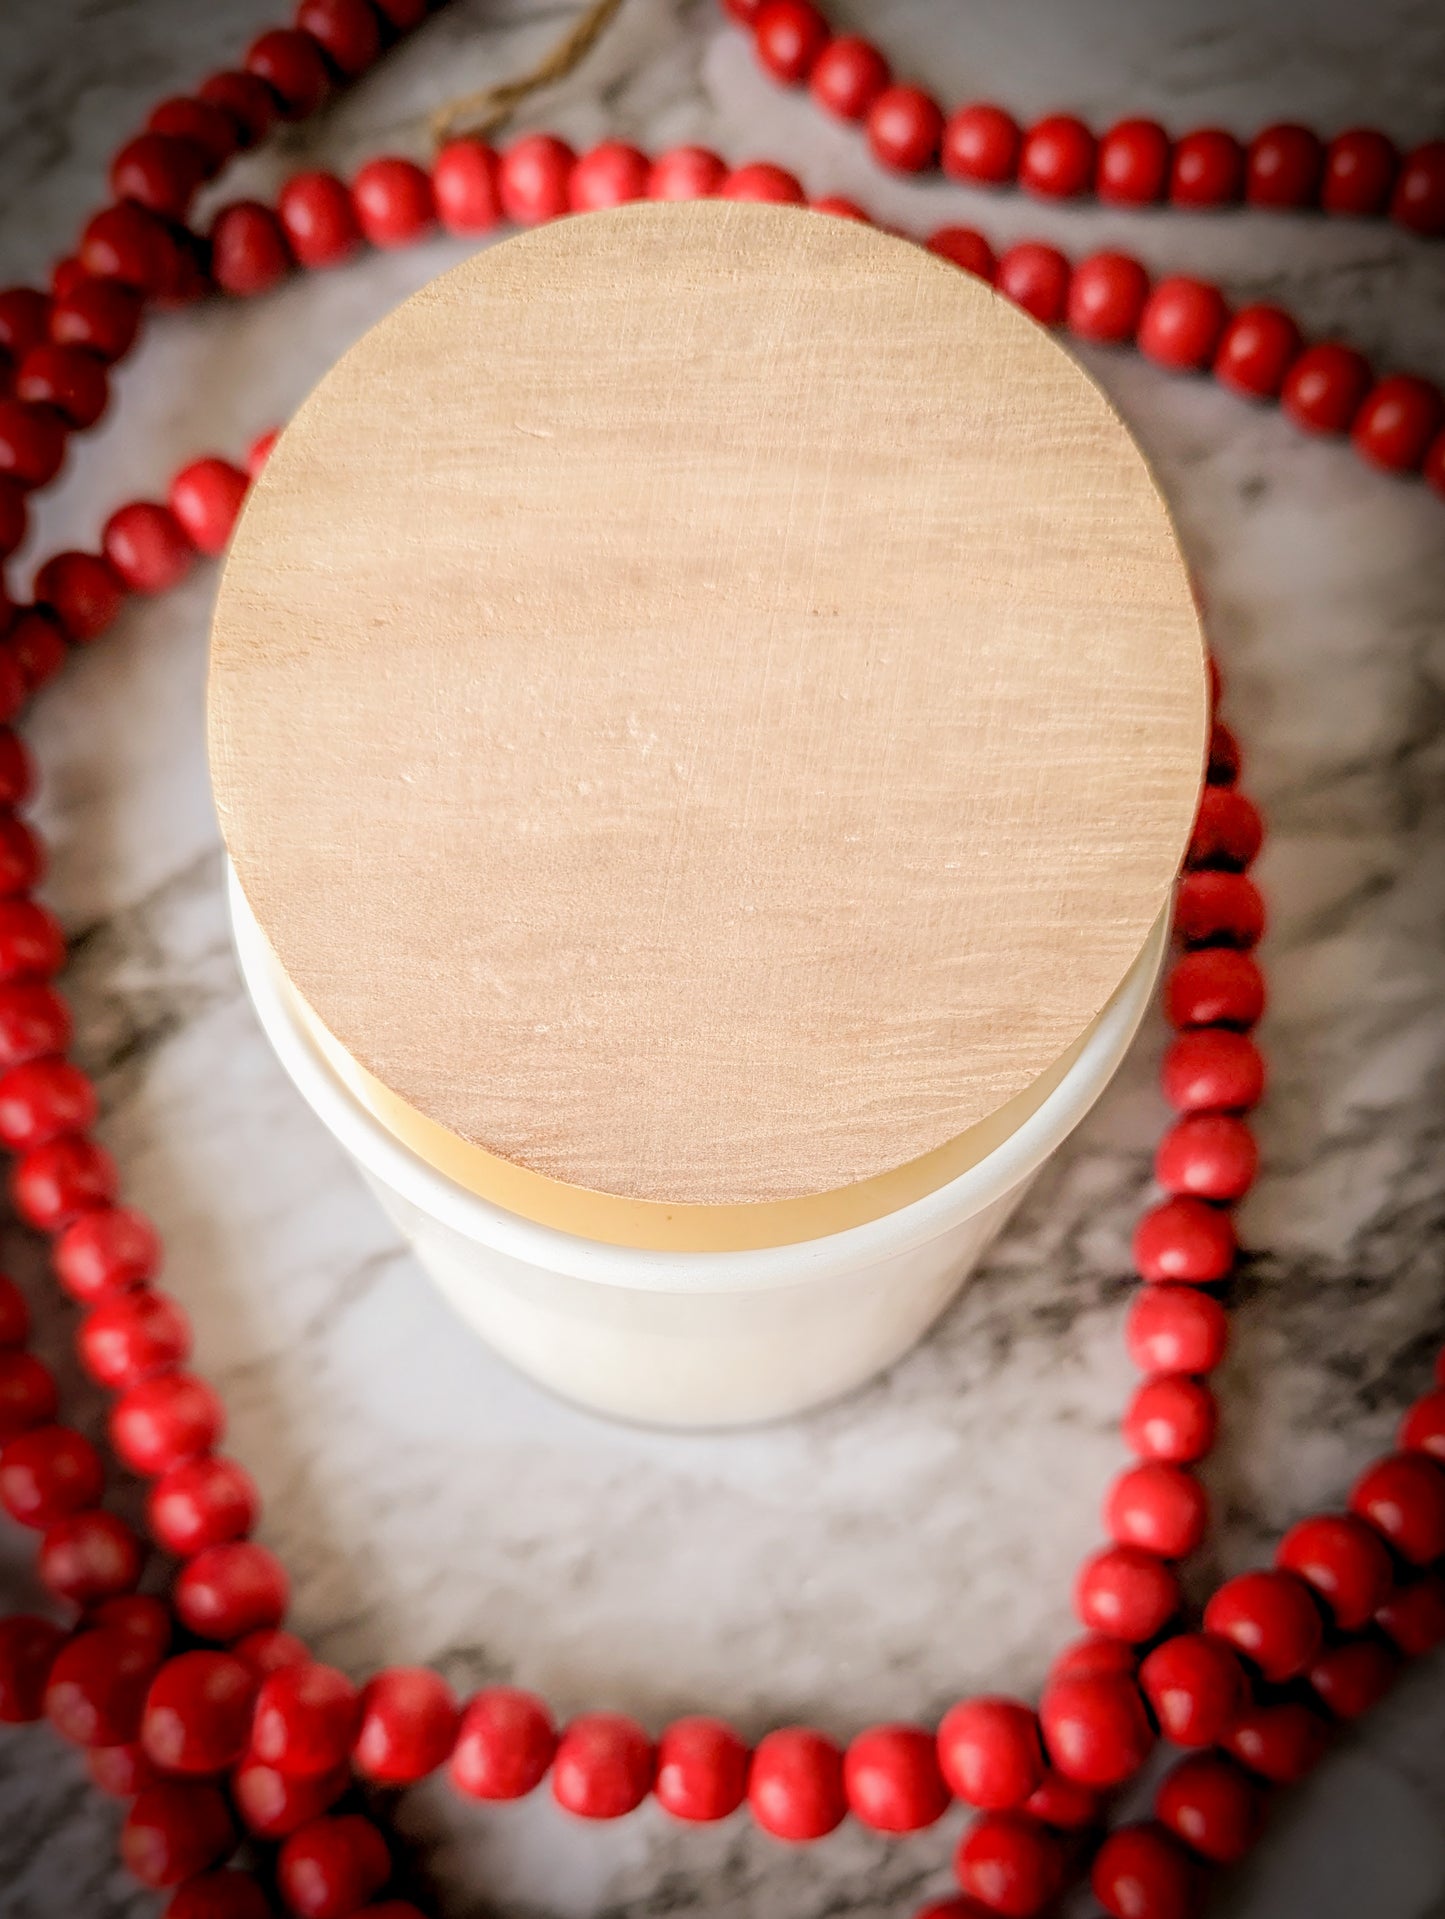 Candles with Customized Wood Lids